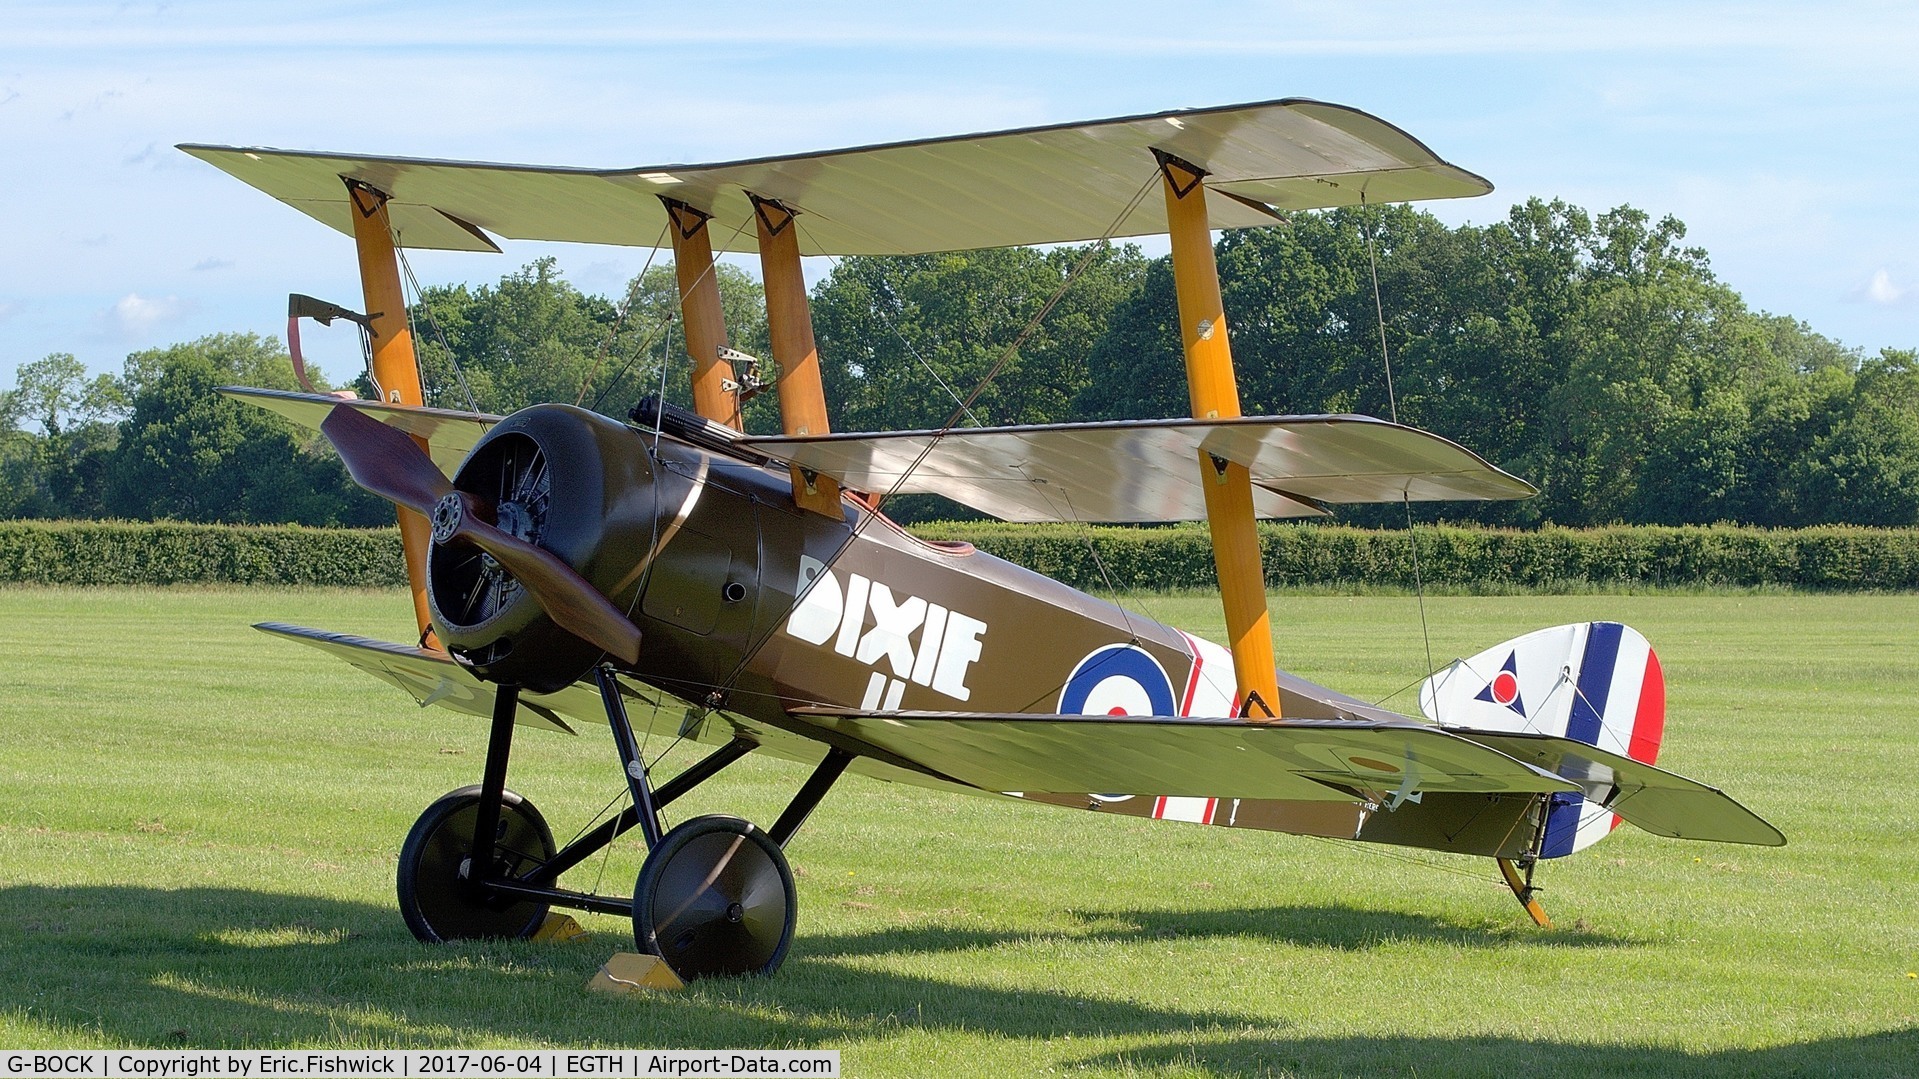 G-BOCK, 1980 Sopwith Triplane Replica C/N NAW-1, 3. G-BOCK - almost back in business - at Shuttleworth Collection's 'Fly Navy,' June 2017.